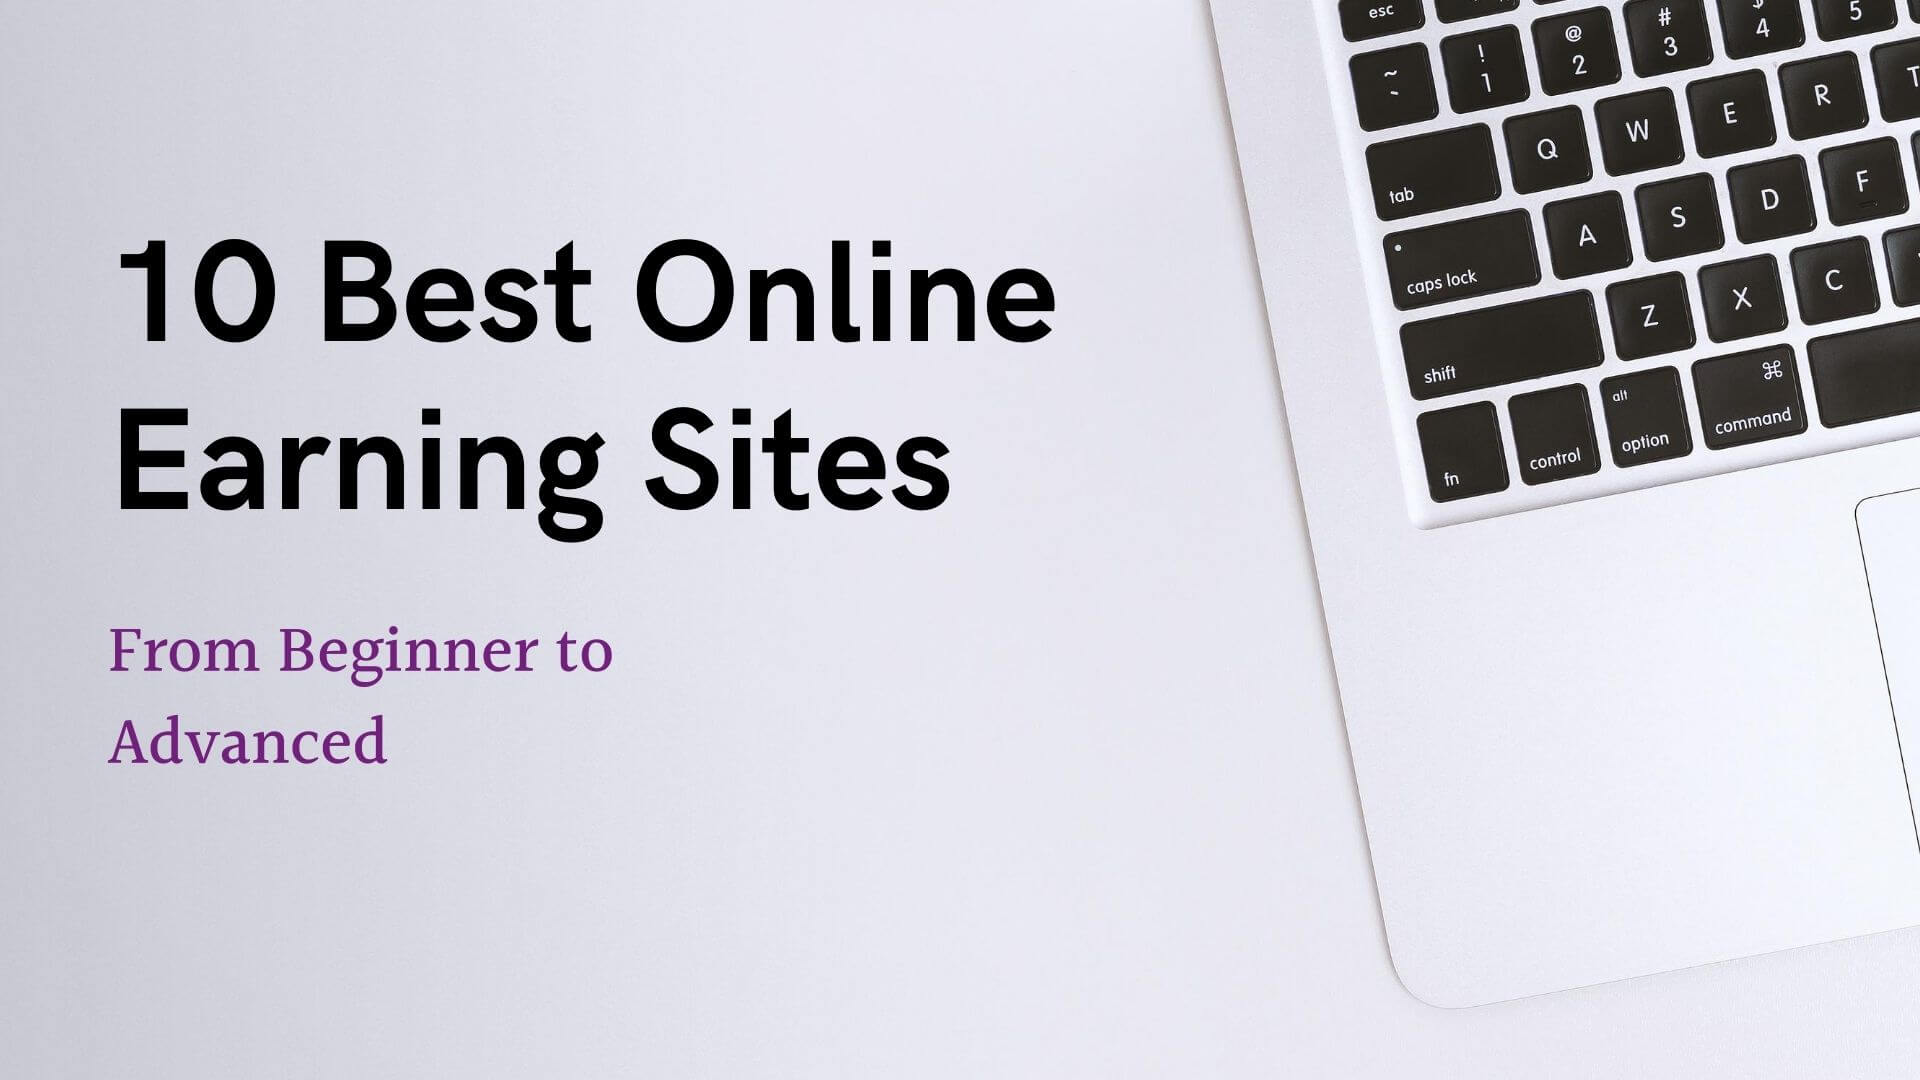 15 Trusted Online Money Earning Sites in 2021 - Without Investment